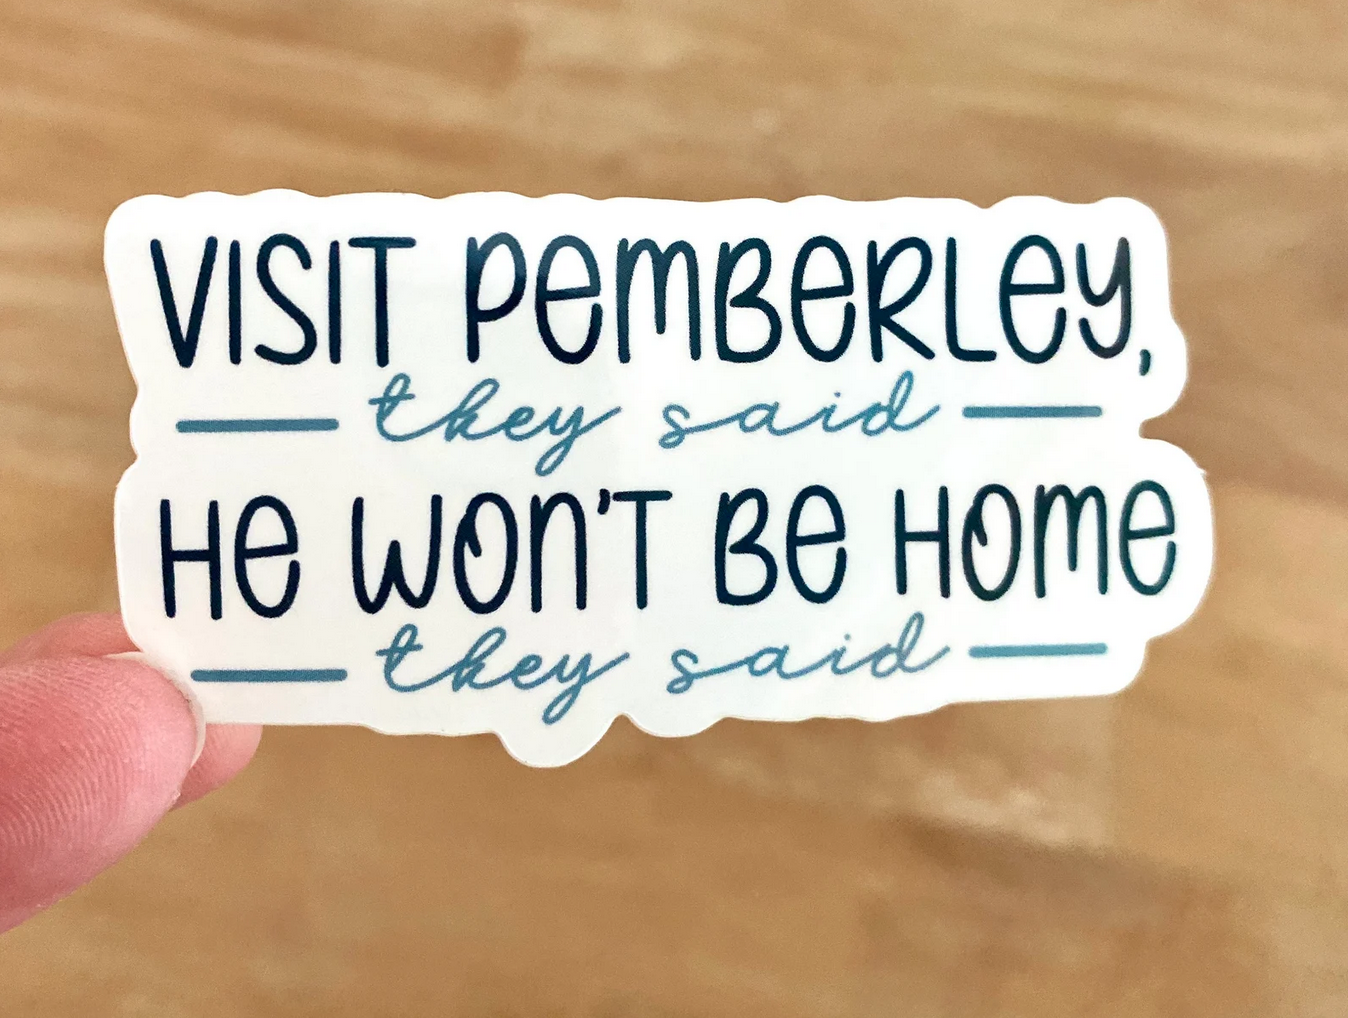 A sticker that says "Visit Pemberley, they said. He won't be home, they said."